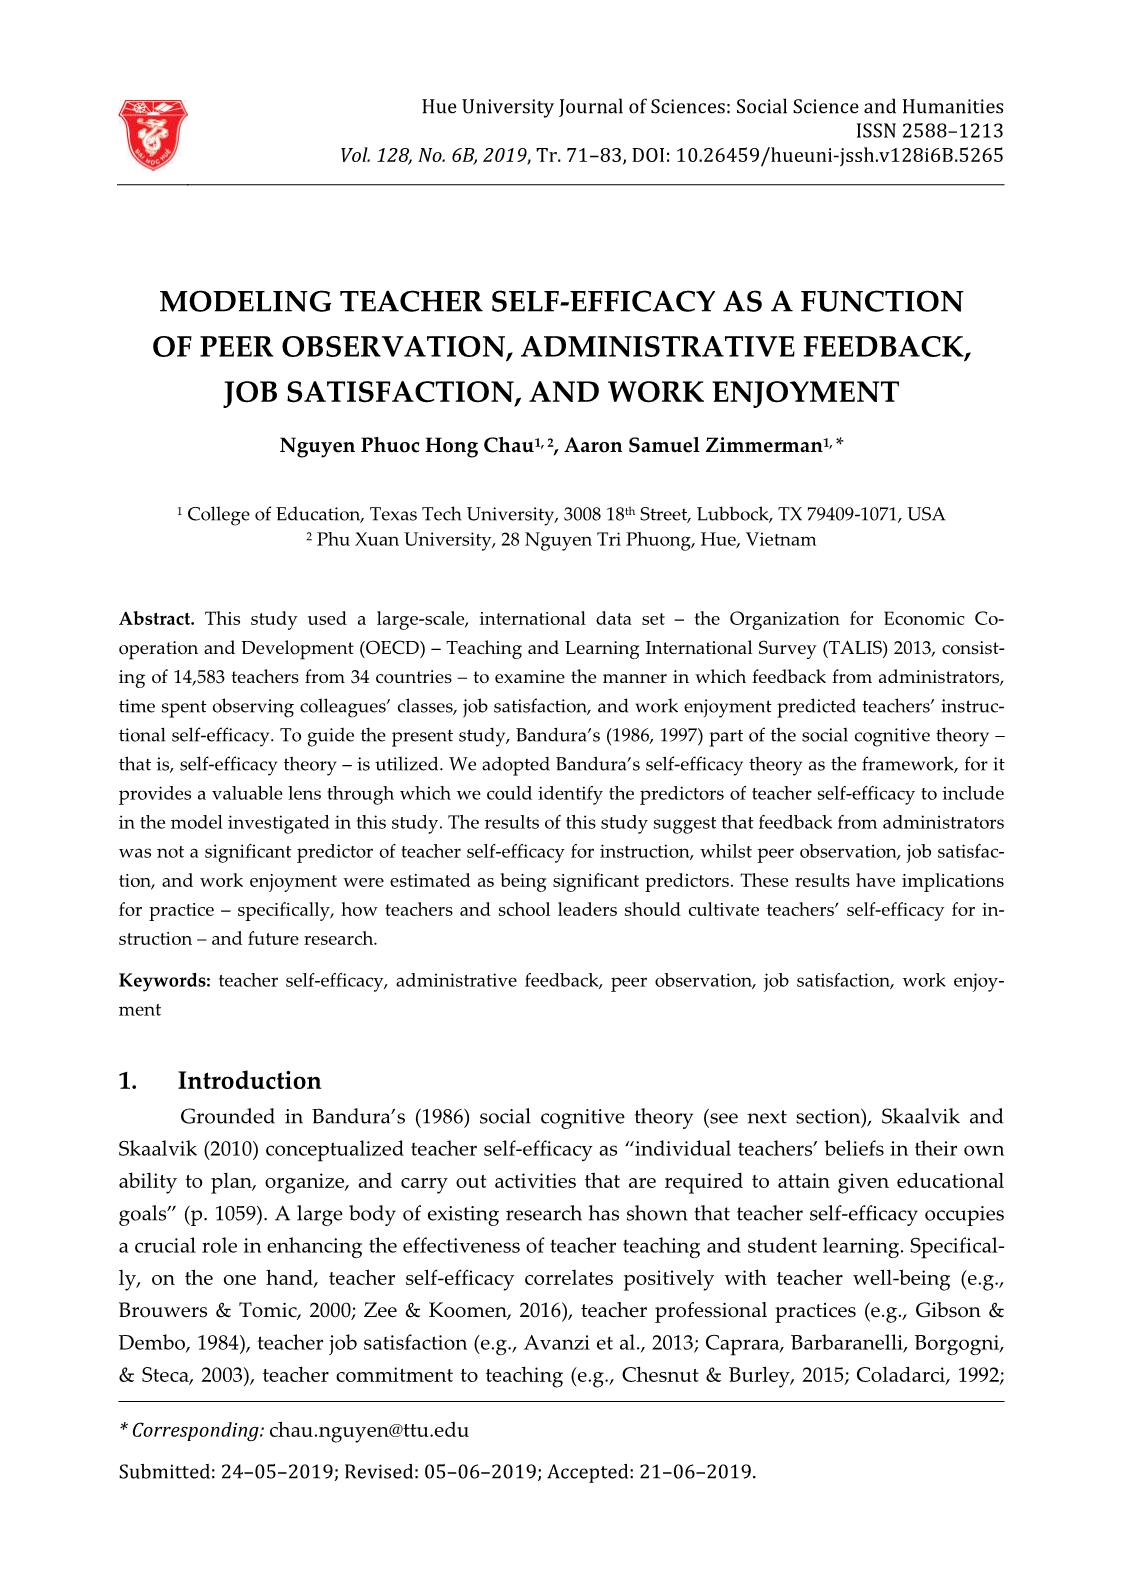 Modeling teacher self-efficacy as a function of peer observation, administrative feedback, job satisfaction, and work enjoyment trang 1